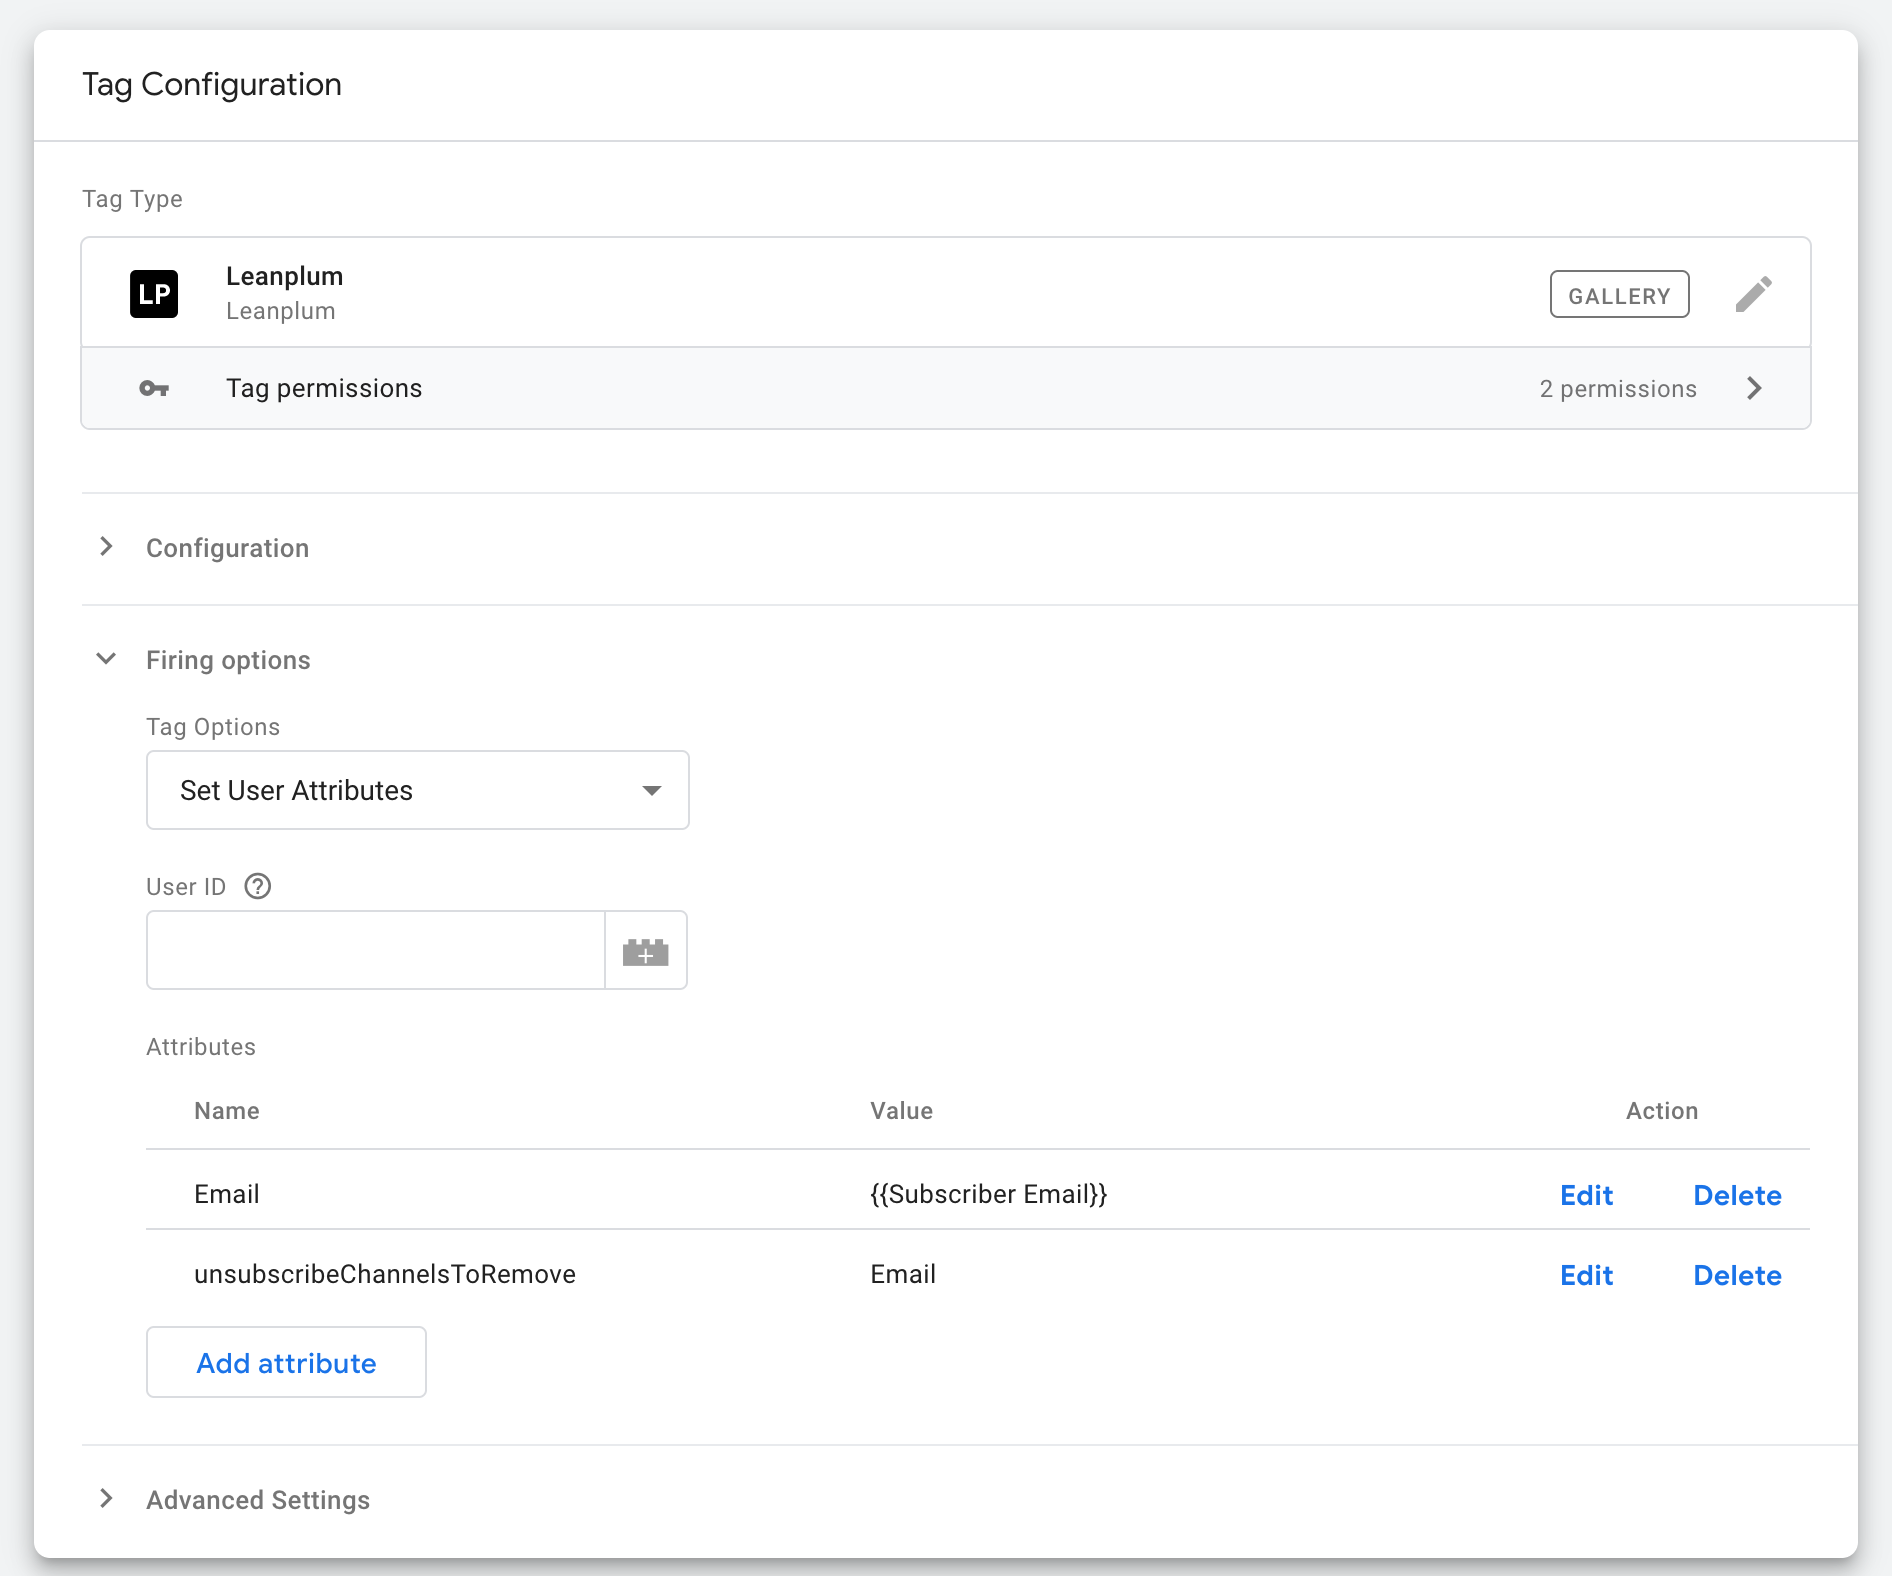 A screenshot of the Google Tag Manager configuration for updating the user attributes.